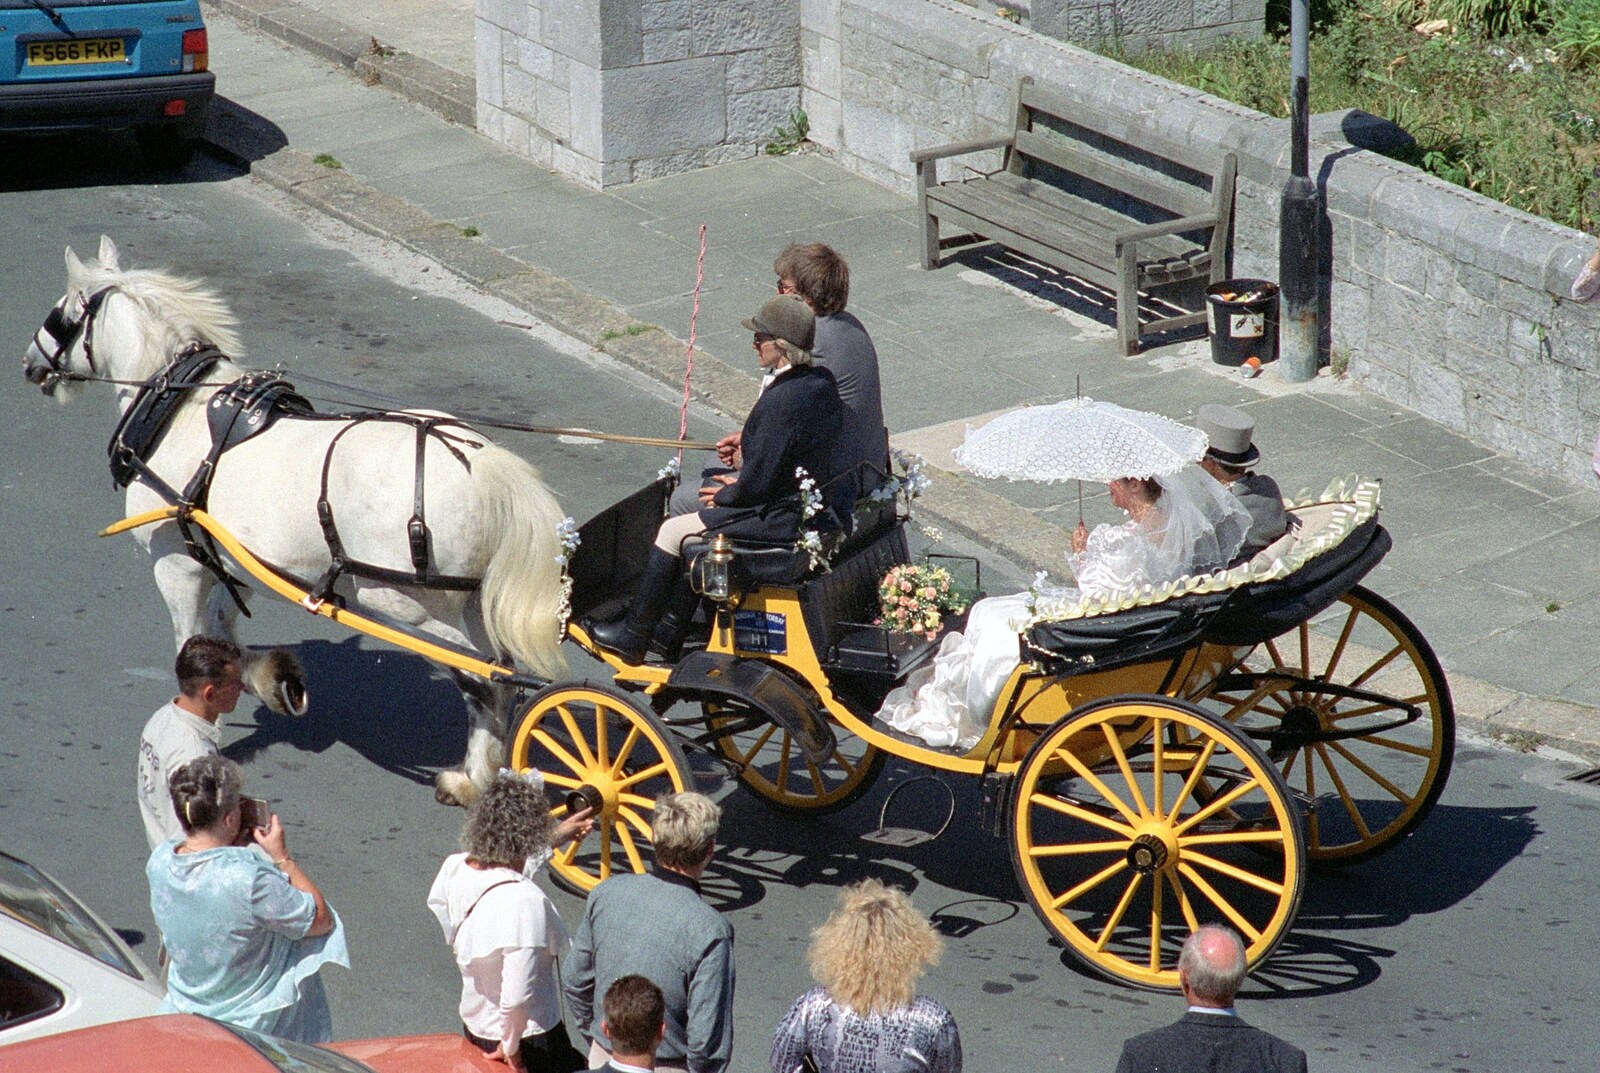 Uni: Risky Business, A Wedding Occurs and Dave Leaves, Wyndham Square, Plymouth - 15th July 1989: The horse-and-cart heads off